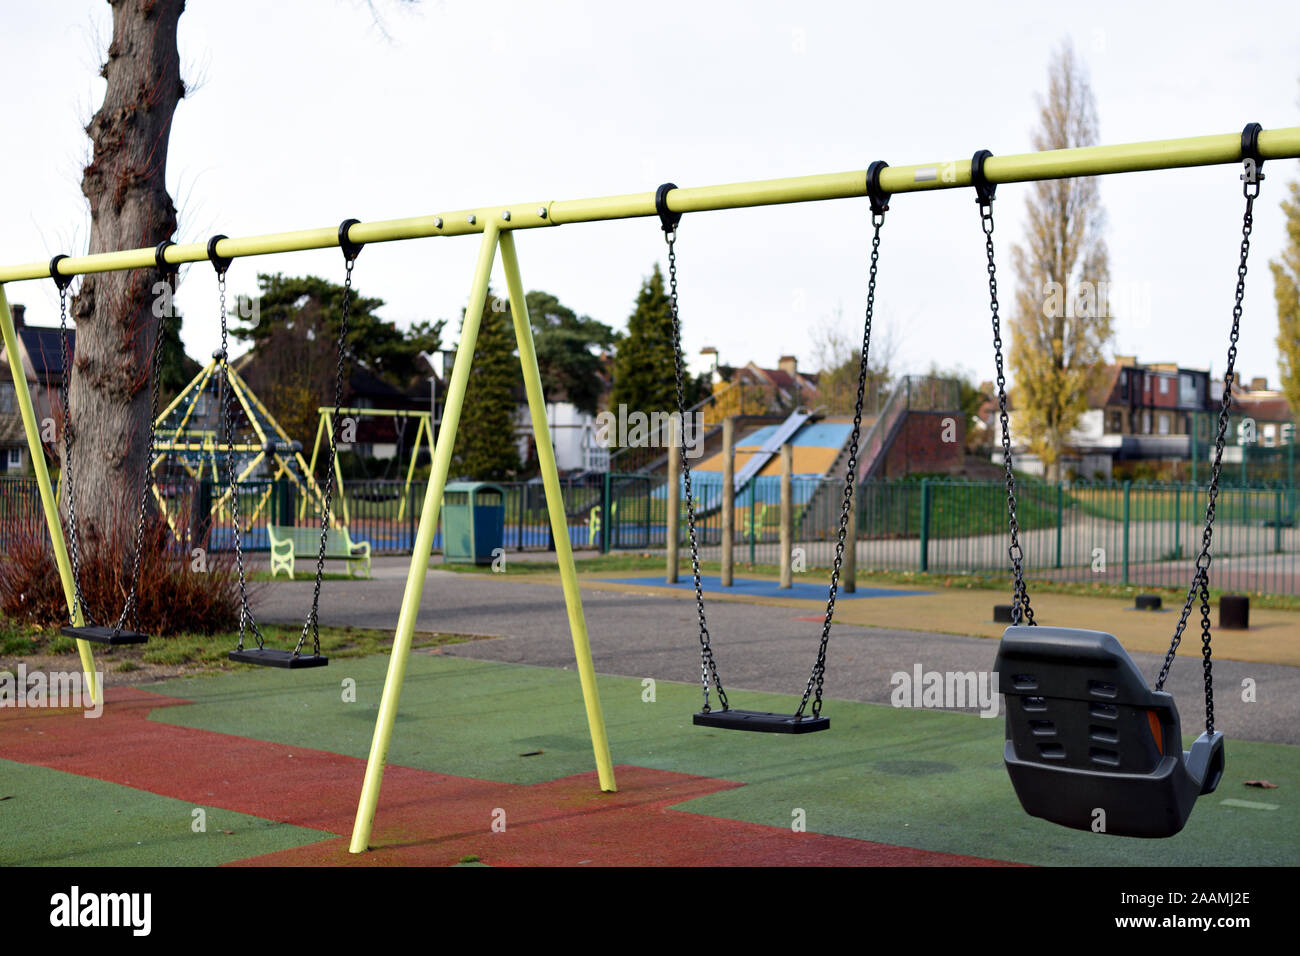 Childrens play area at Furzedown recreation ground Stock Photo